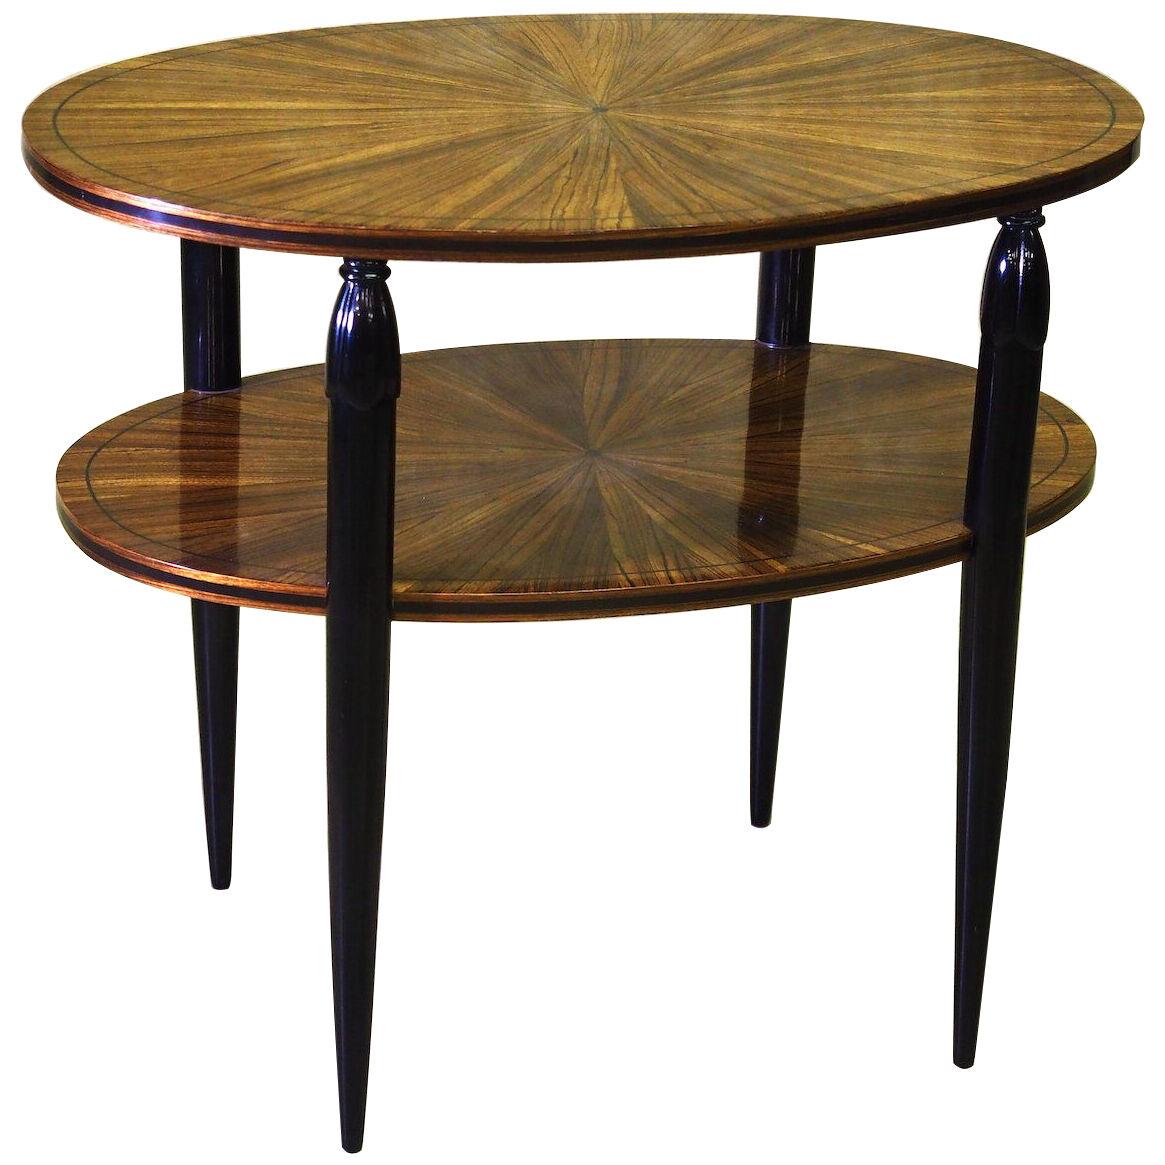 (Attributed to) Maurice Dufrene oval two-tiered table